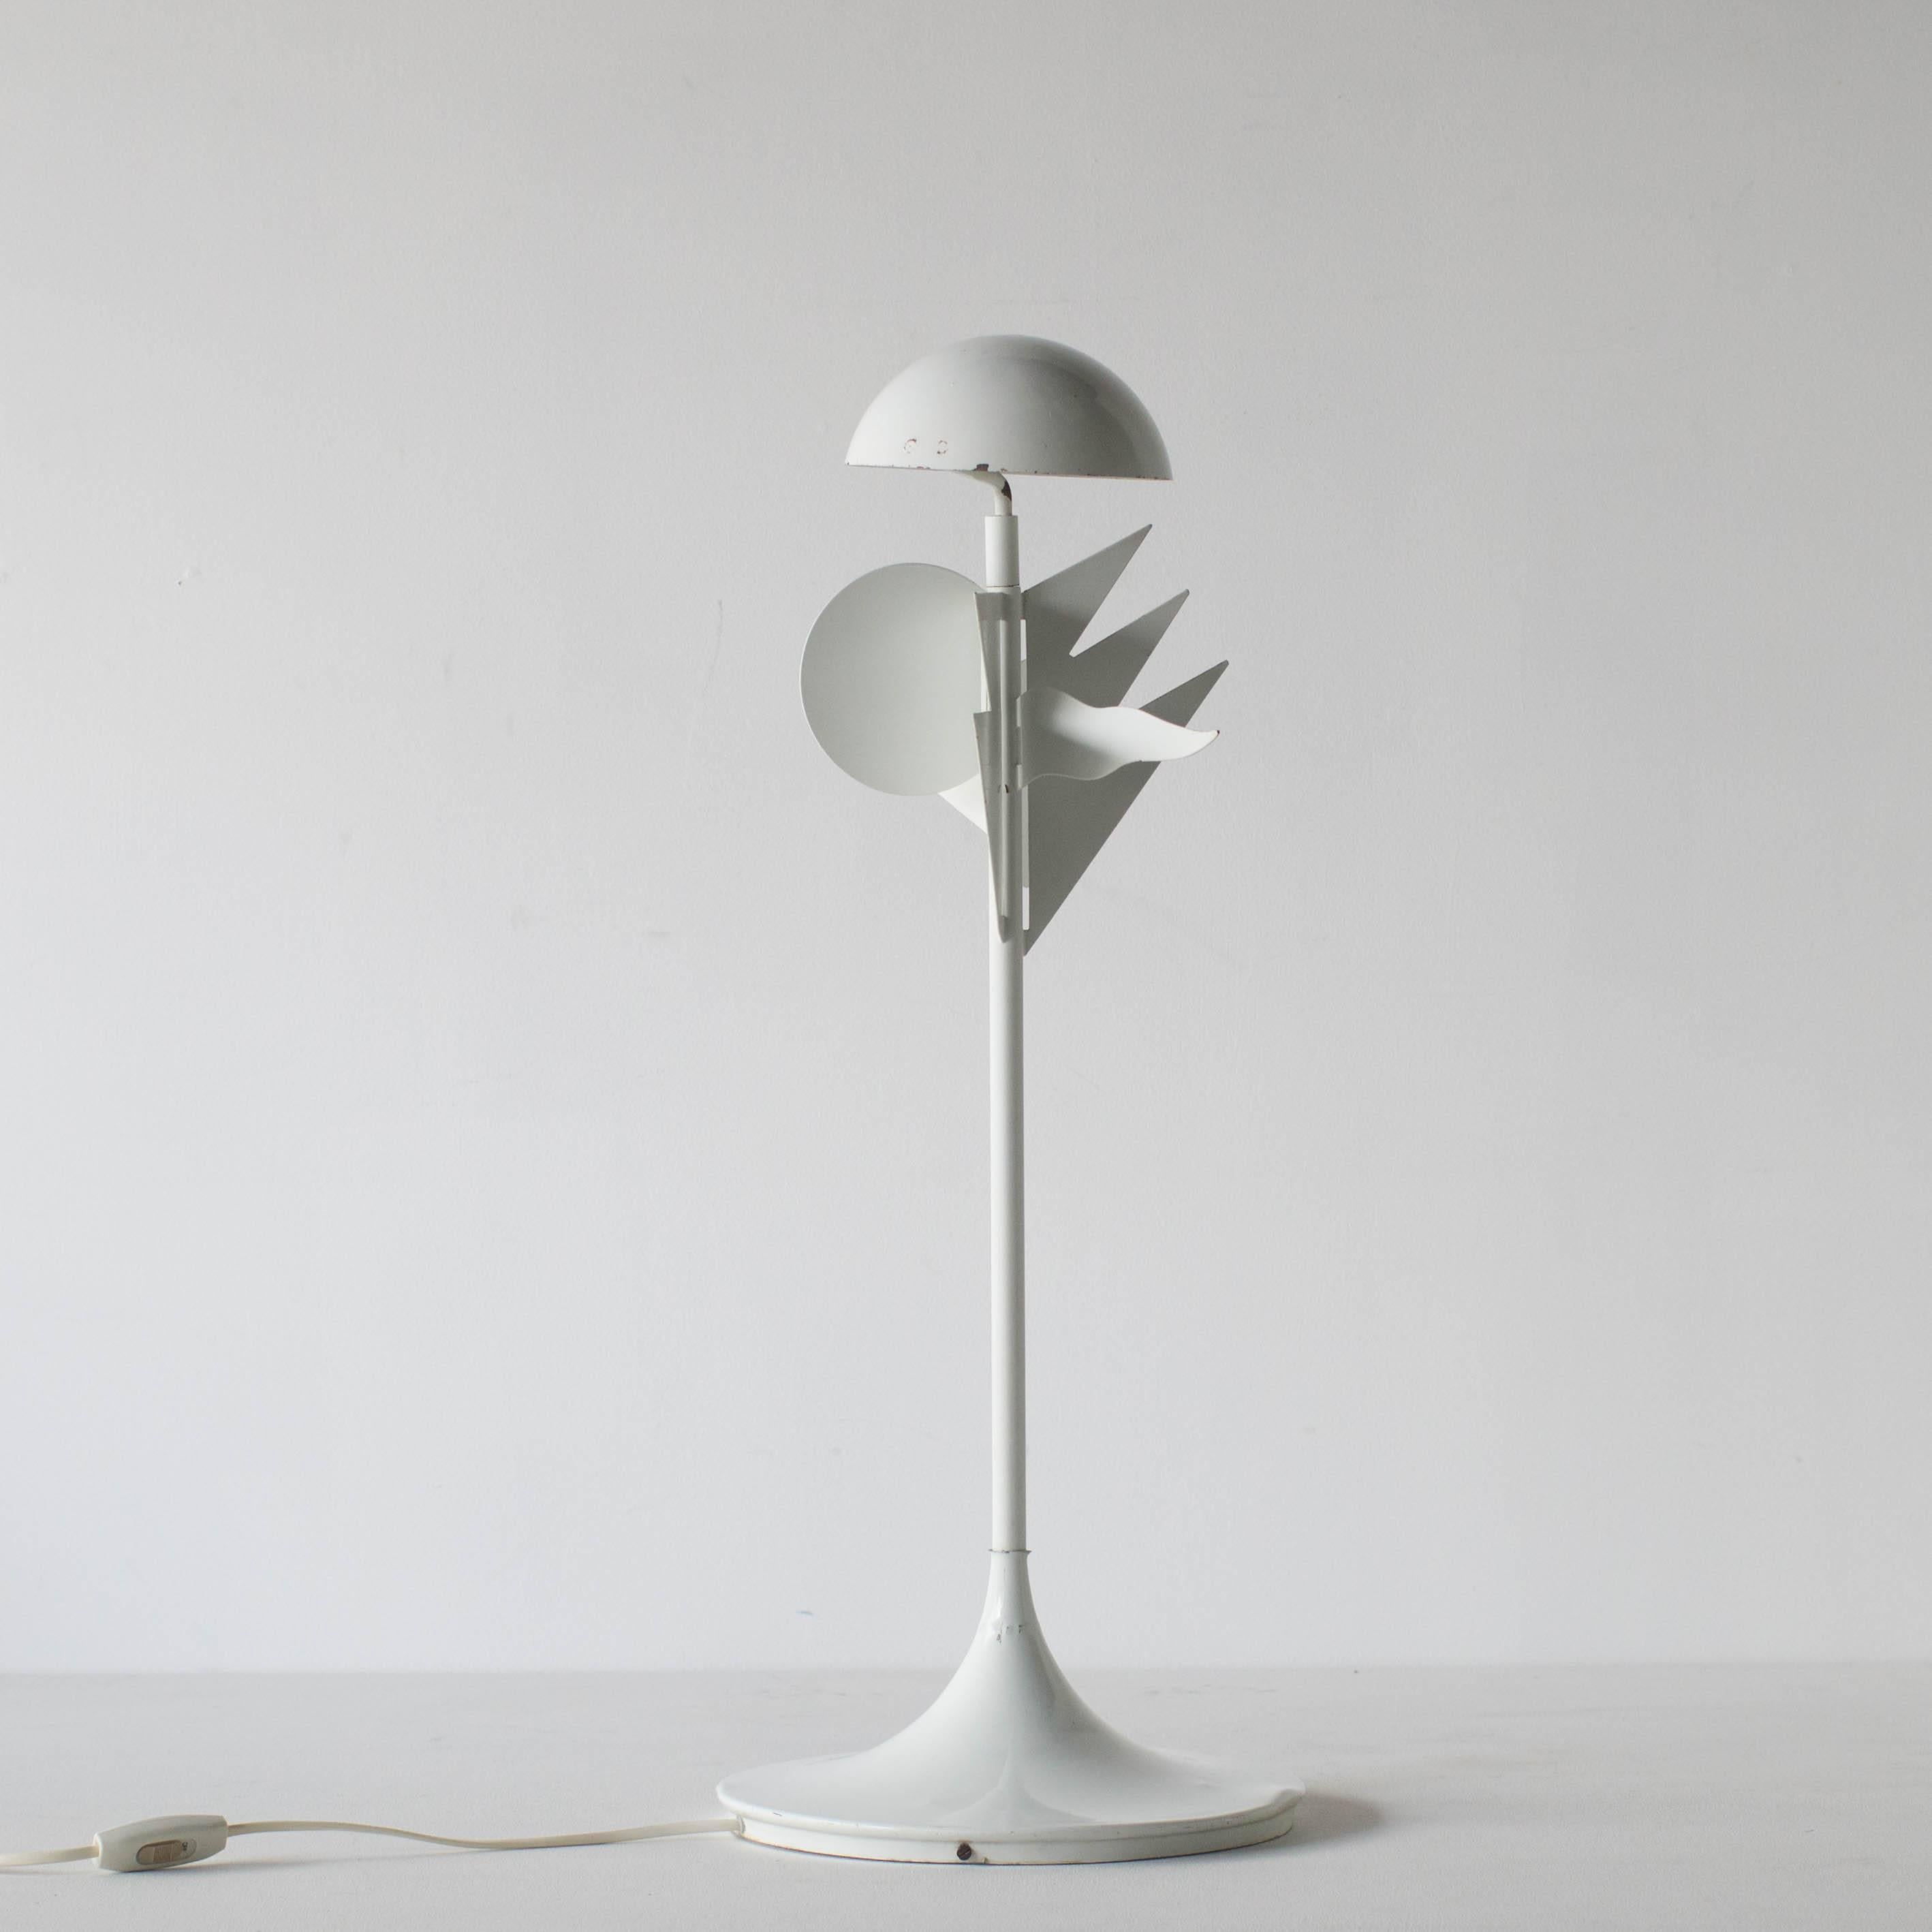 Papalina table lamp Alessandro Mendini. Designed in 1983 for Eleusi.
Hard to find lamp.